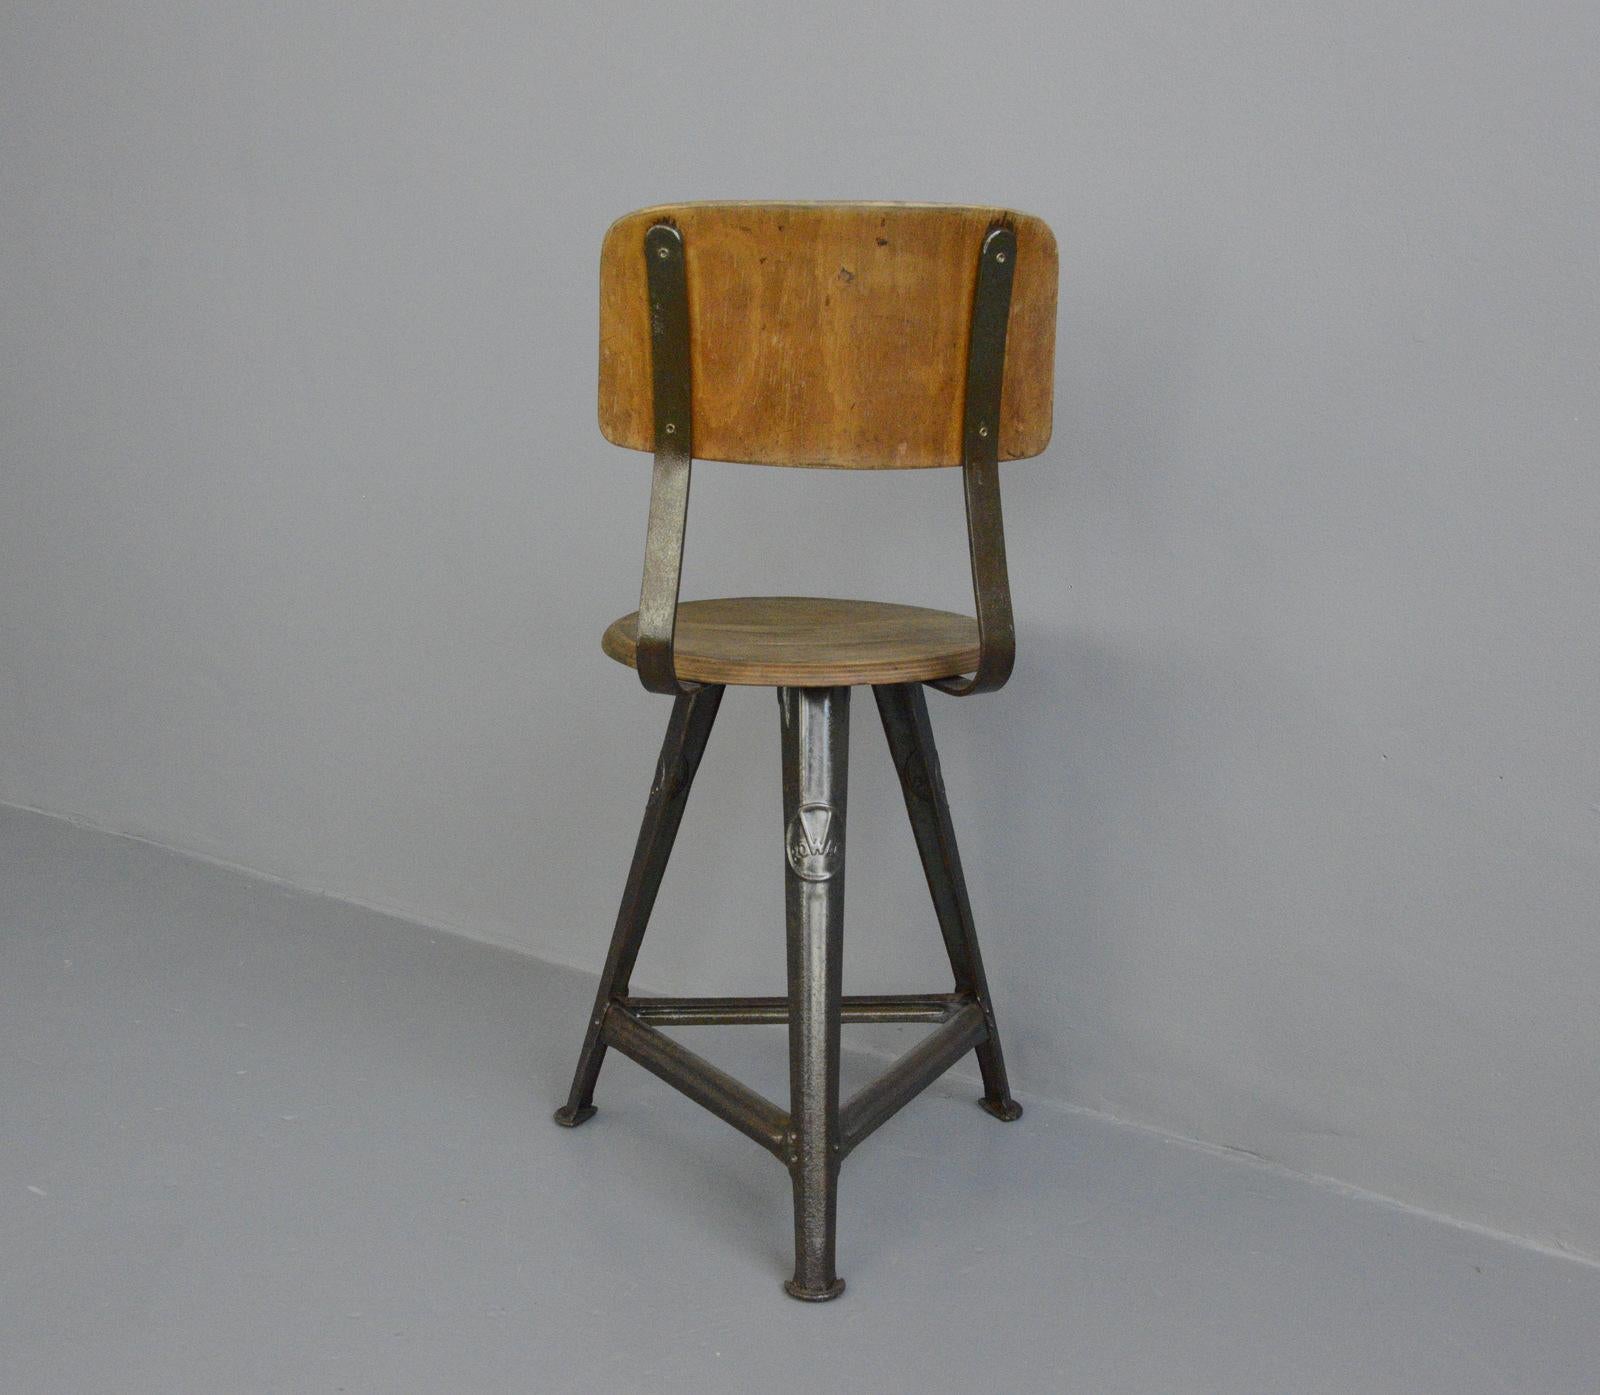 Steel Industrial Factory Chair by Rowac, circa 1920s